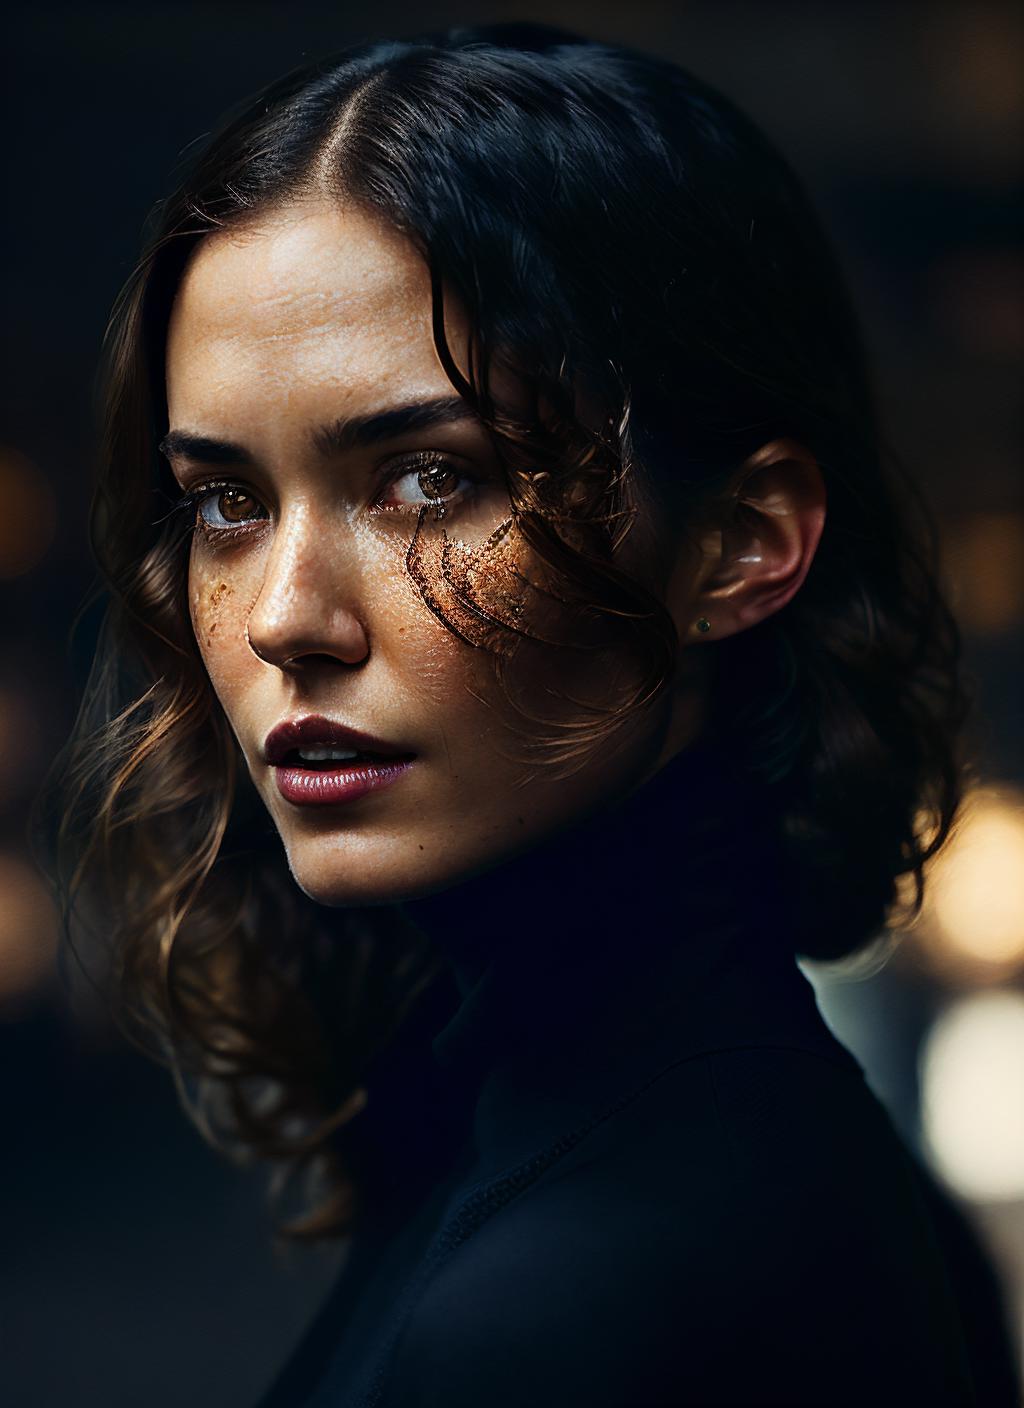 Odette Annable image by malcolmrey